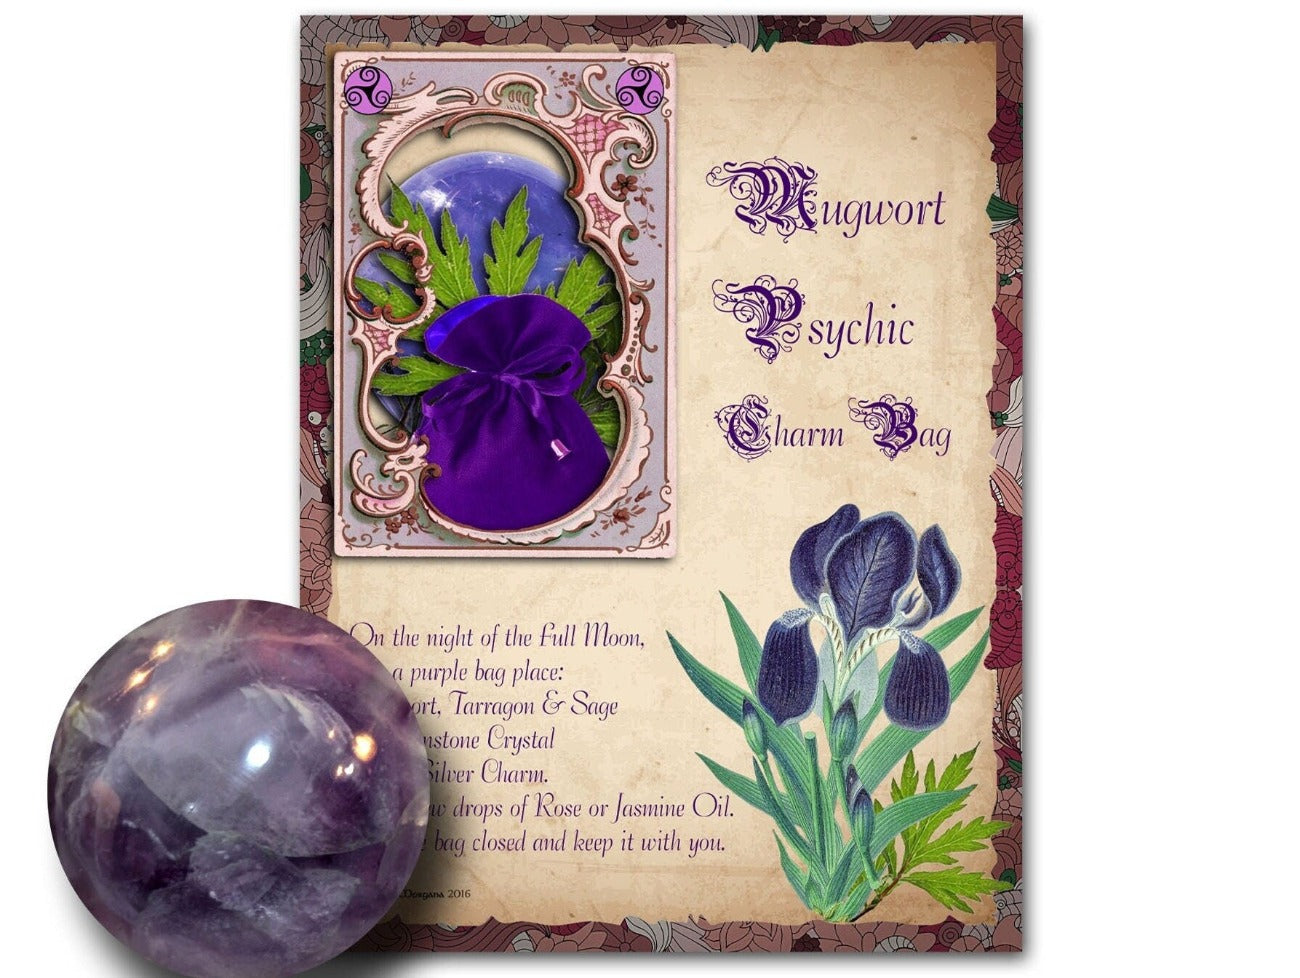 MUGWORT PSYCHIC Charm Bag, Recipe Spell, Apothecary Green Witchcraft, Wicca Witch Psychic Clairvoyant Spell Printable for your Grimoire - Morgana Magick Spell